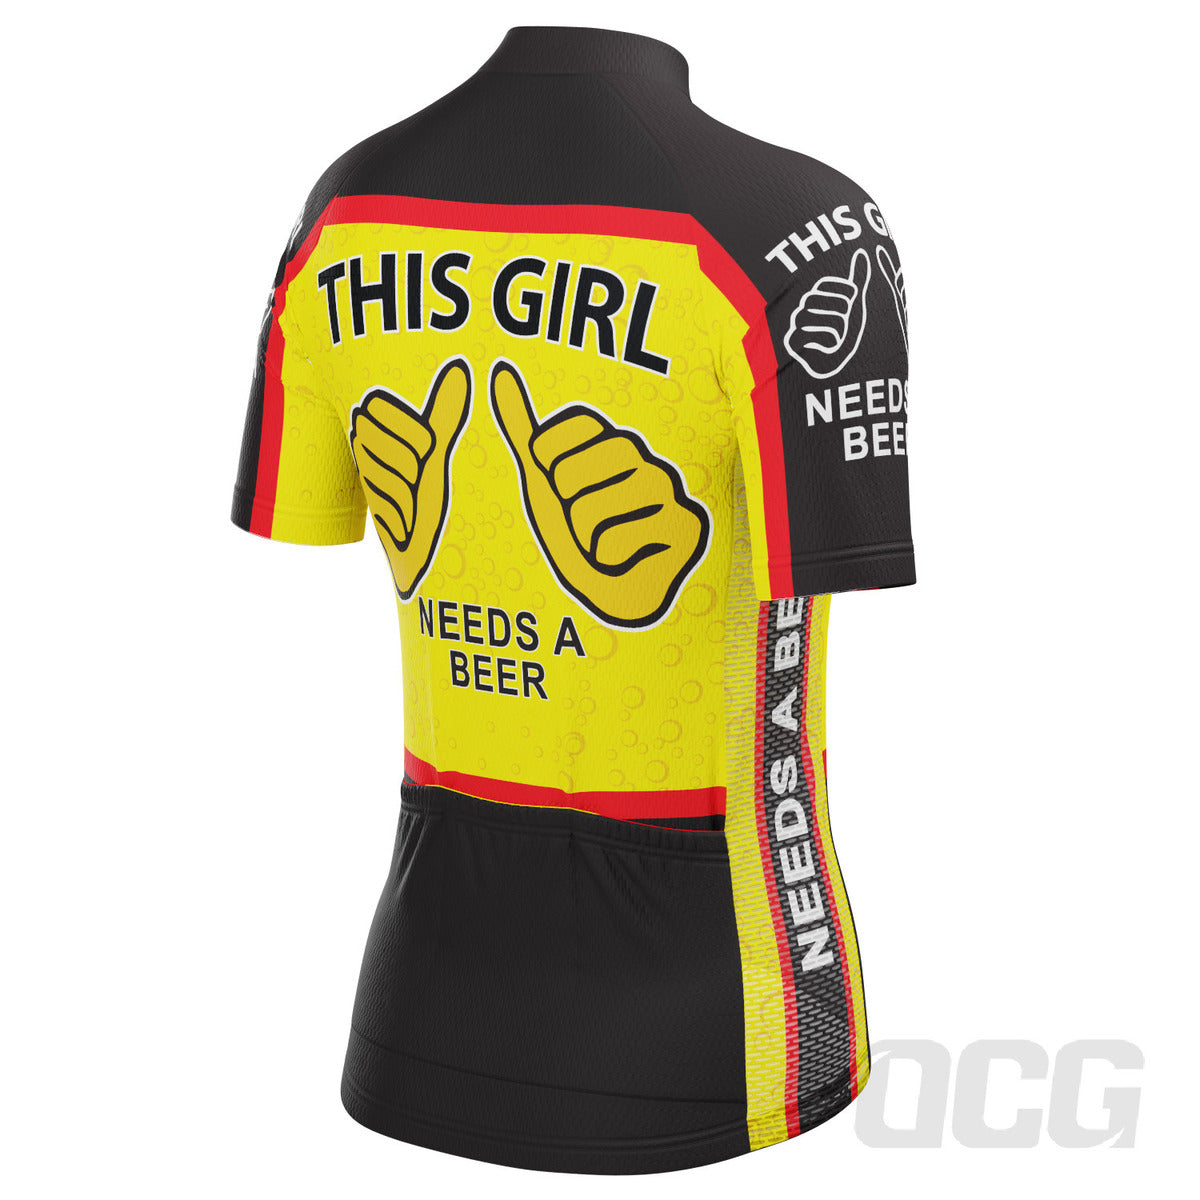 This Girl Needs a Beer Women's Cycling Jersey